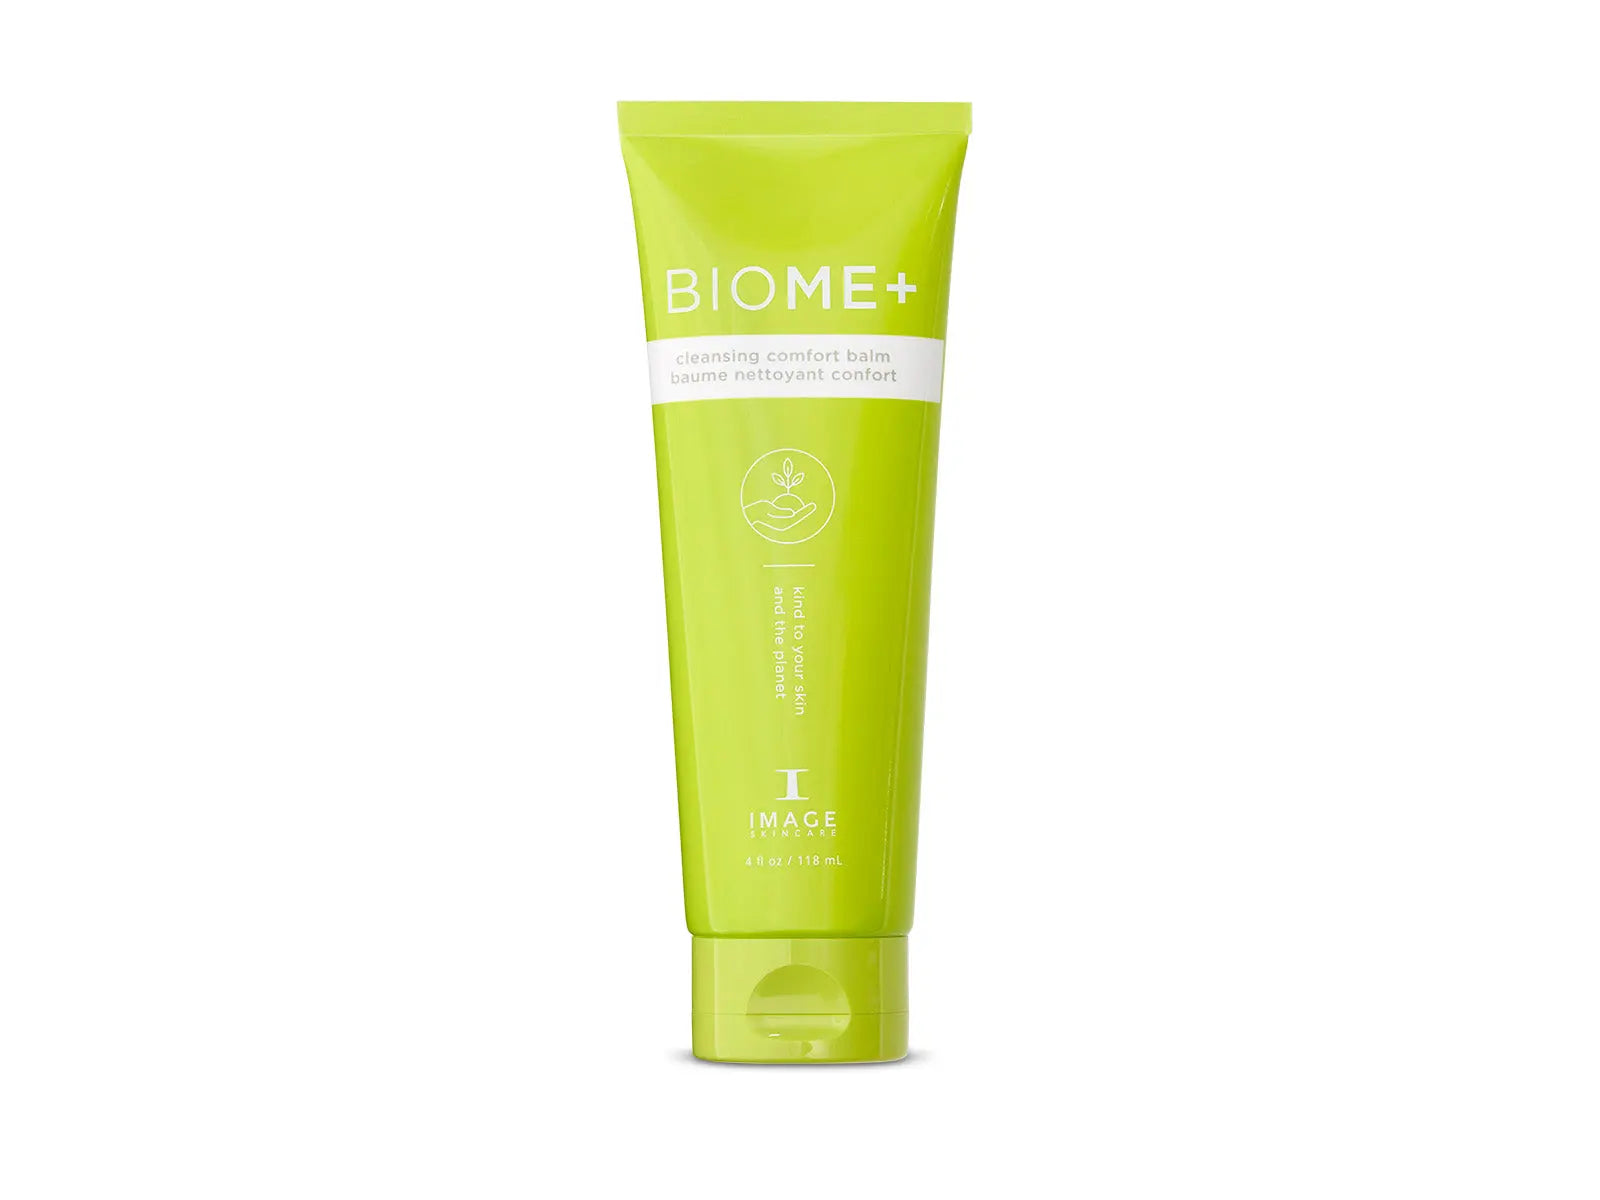 BIOME+ Cleansing Comfort Balm 118ml. IMAGE